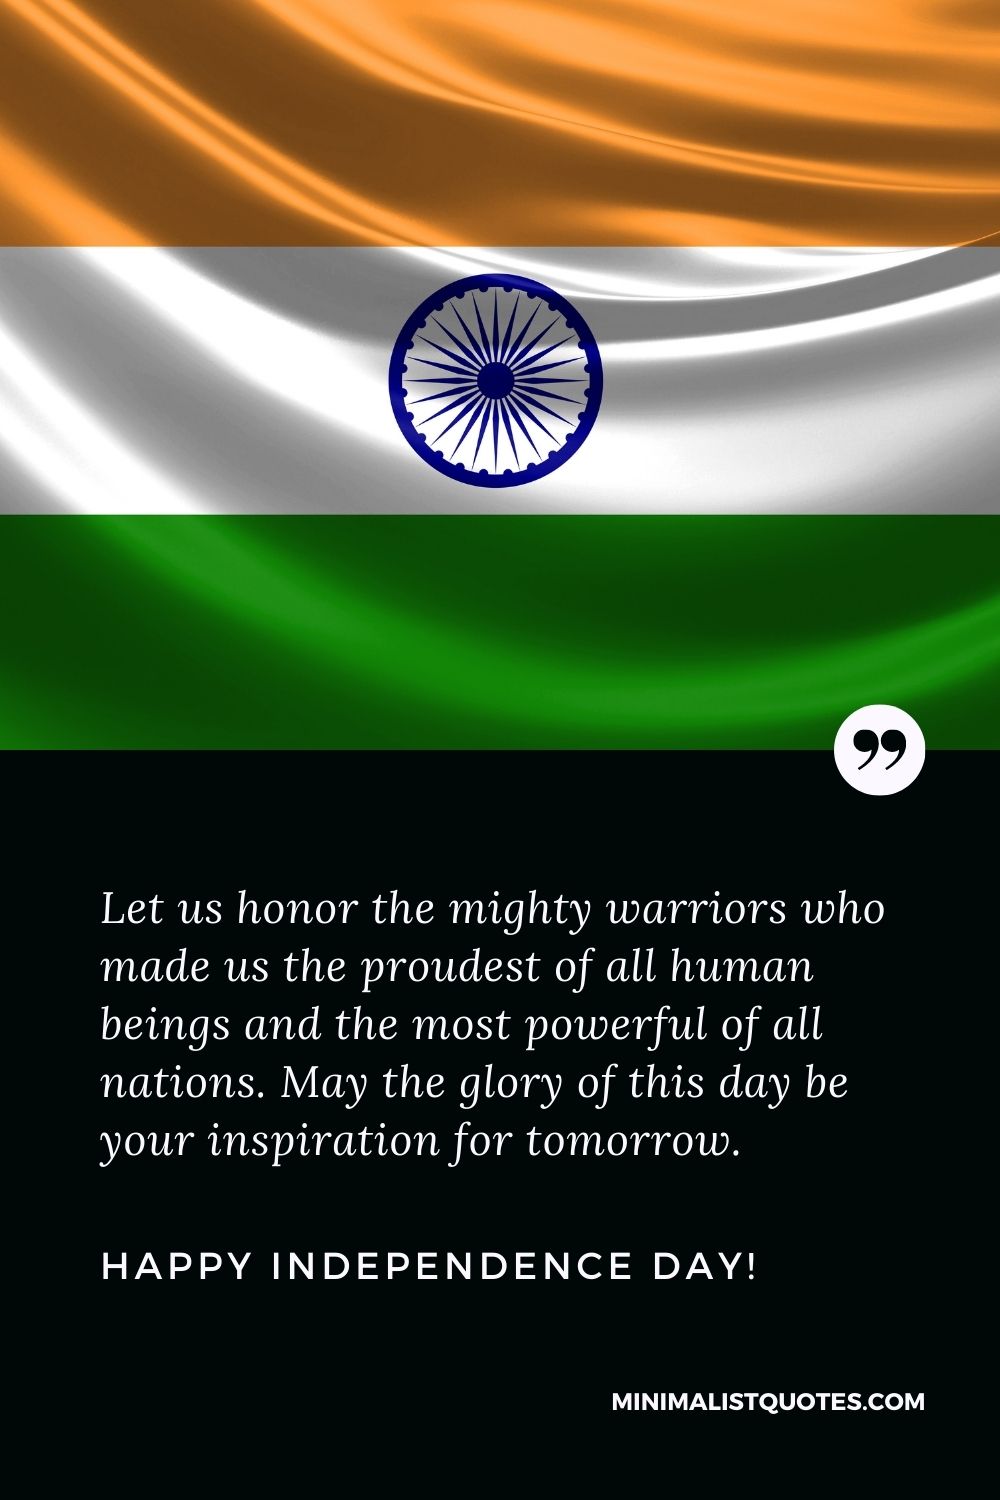 Independence Day (India) Wishes, Quotes & Messages Minimalist Quotes